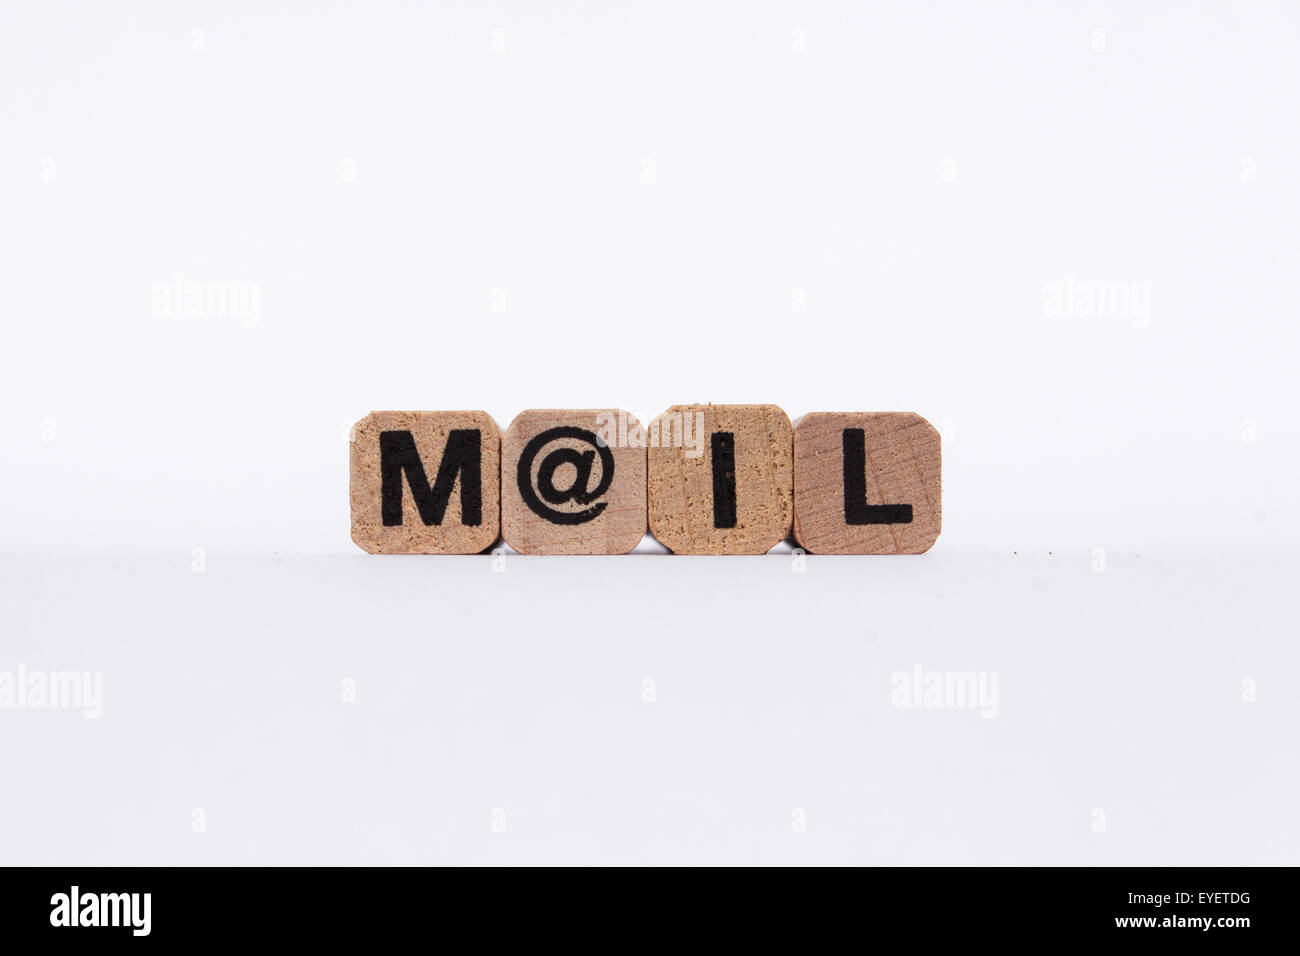 email, mail concept text on white background Stock Photo